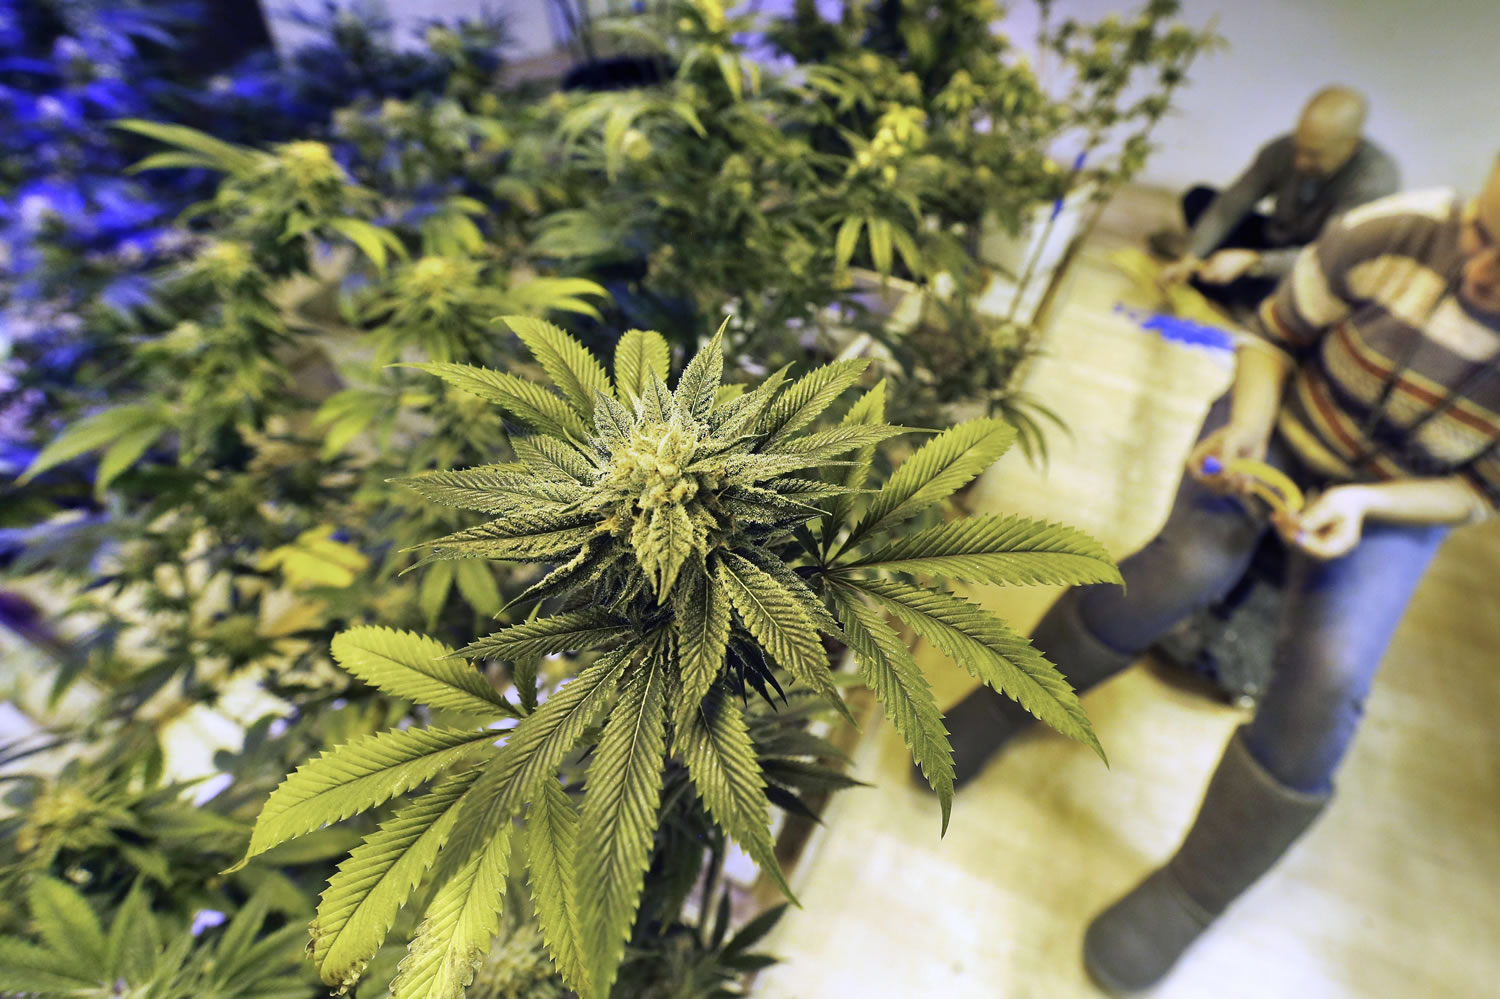 FILE - In this Dec. 31, 2013 file photo, employees tends to marijuana plants at a grow house in Denver. According to law enforcement officials, Colorado?s legal marijuana marketplace is in some cases serving as cover for a host of illegal drug traffickers who hide their product among the state?s many legal growing operations, then covertly ship it elsewhere and pocket millions of dollars from its sale.